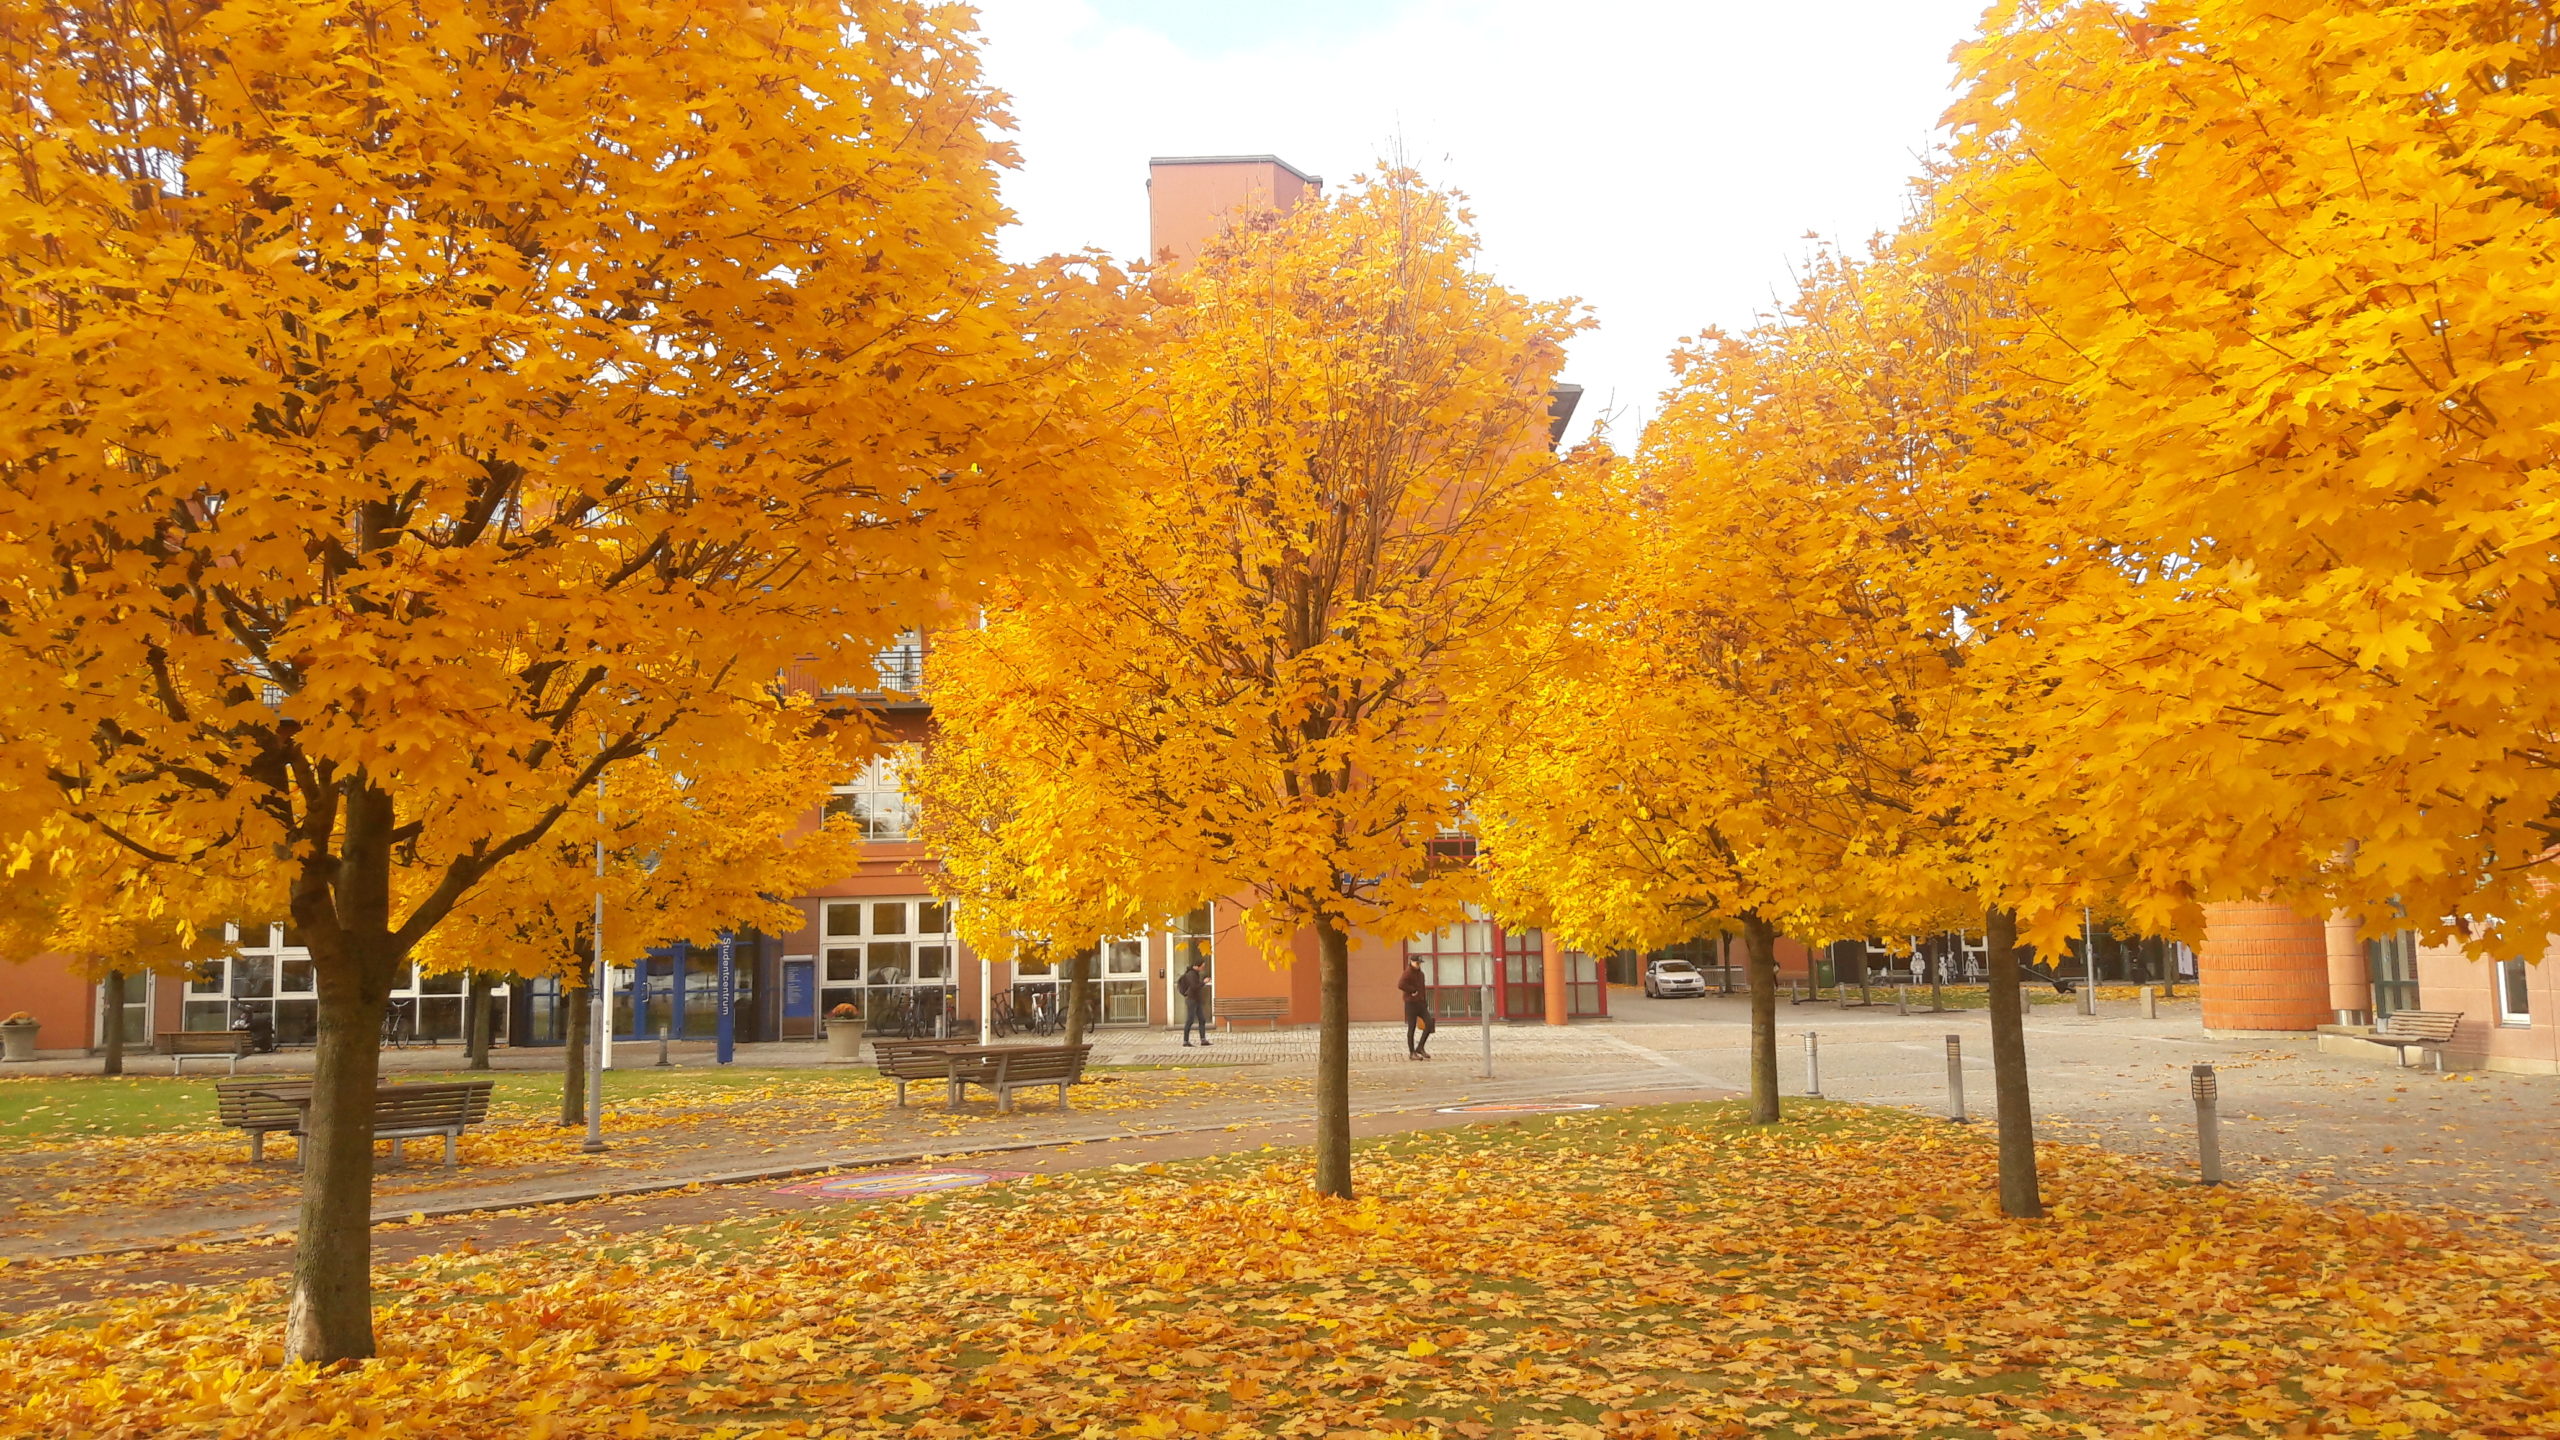 50 shades of Swedish Autumn - Study in Sweden